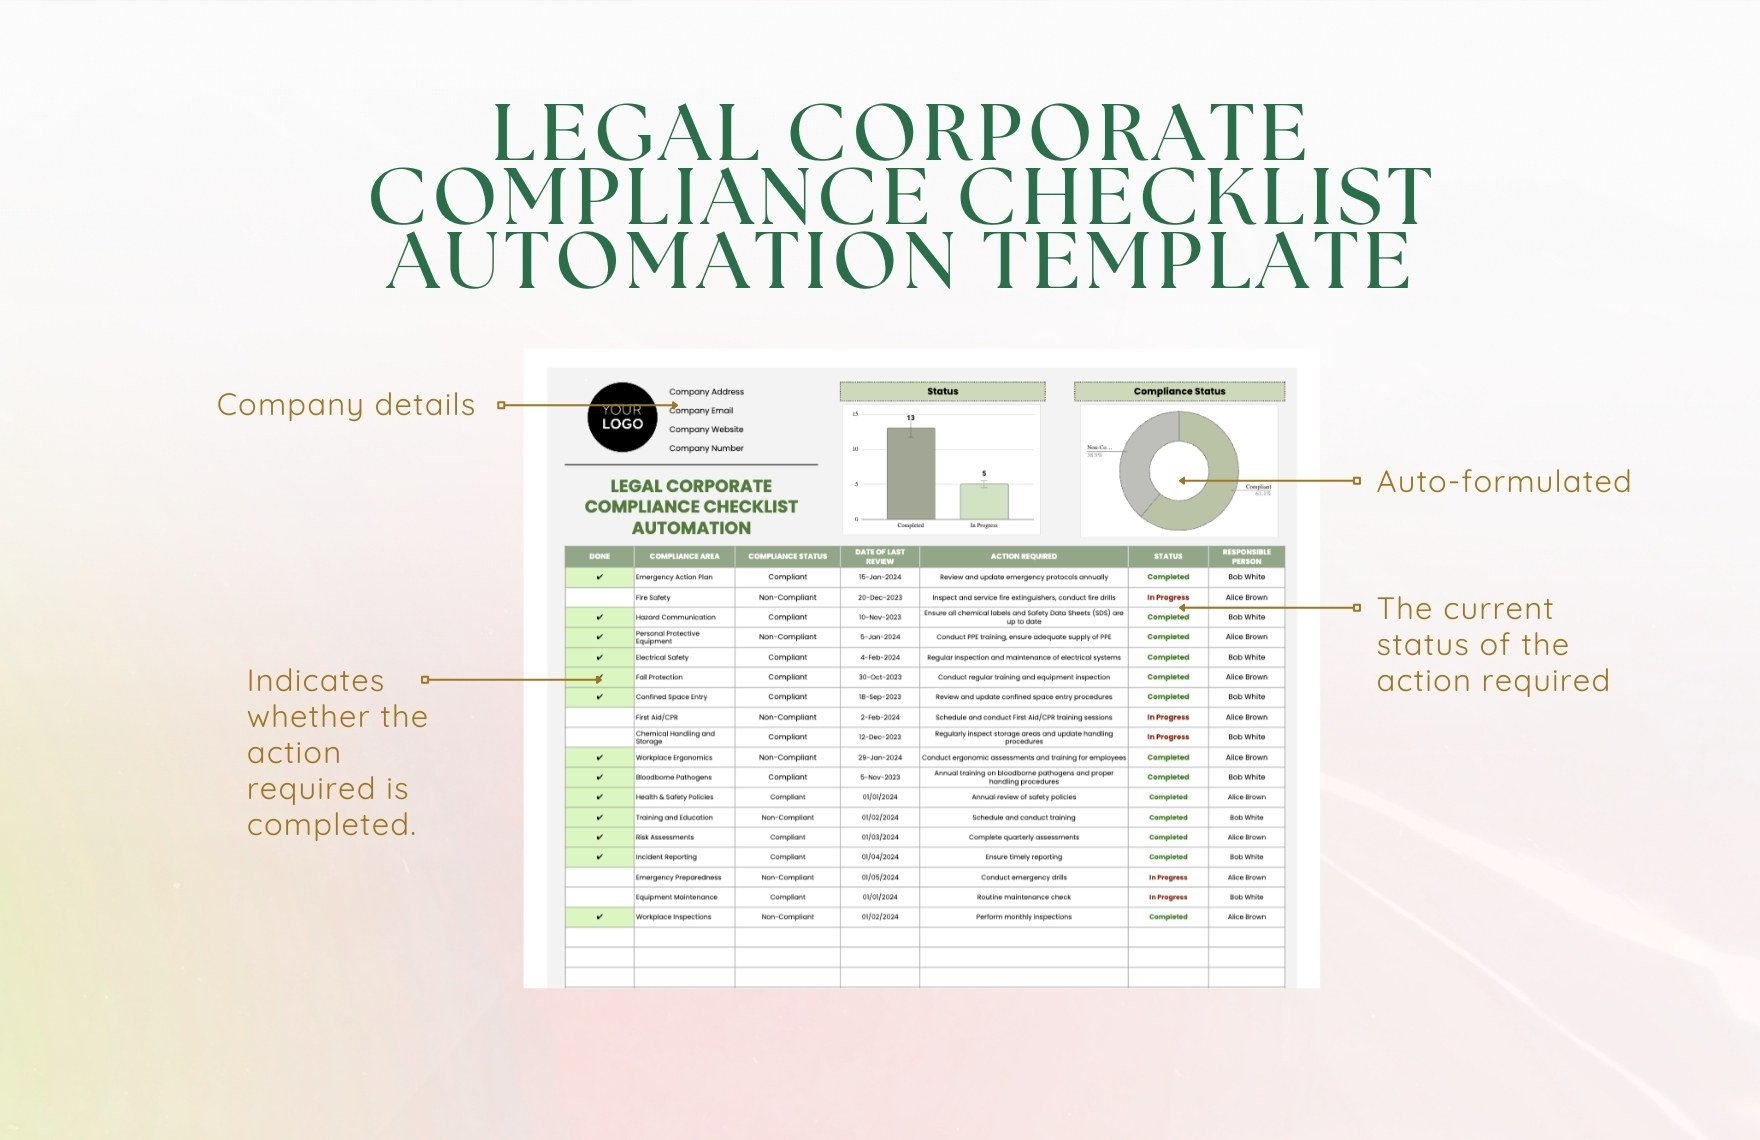 Legal Corporate Compliance Checklist Automation Template